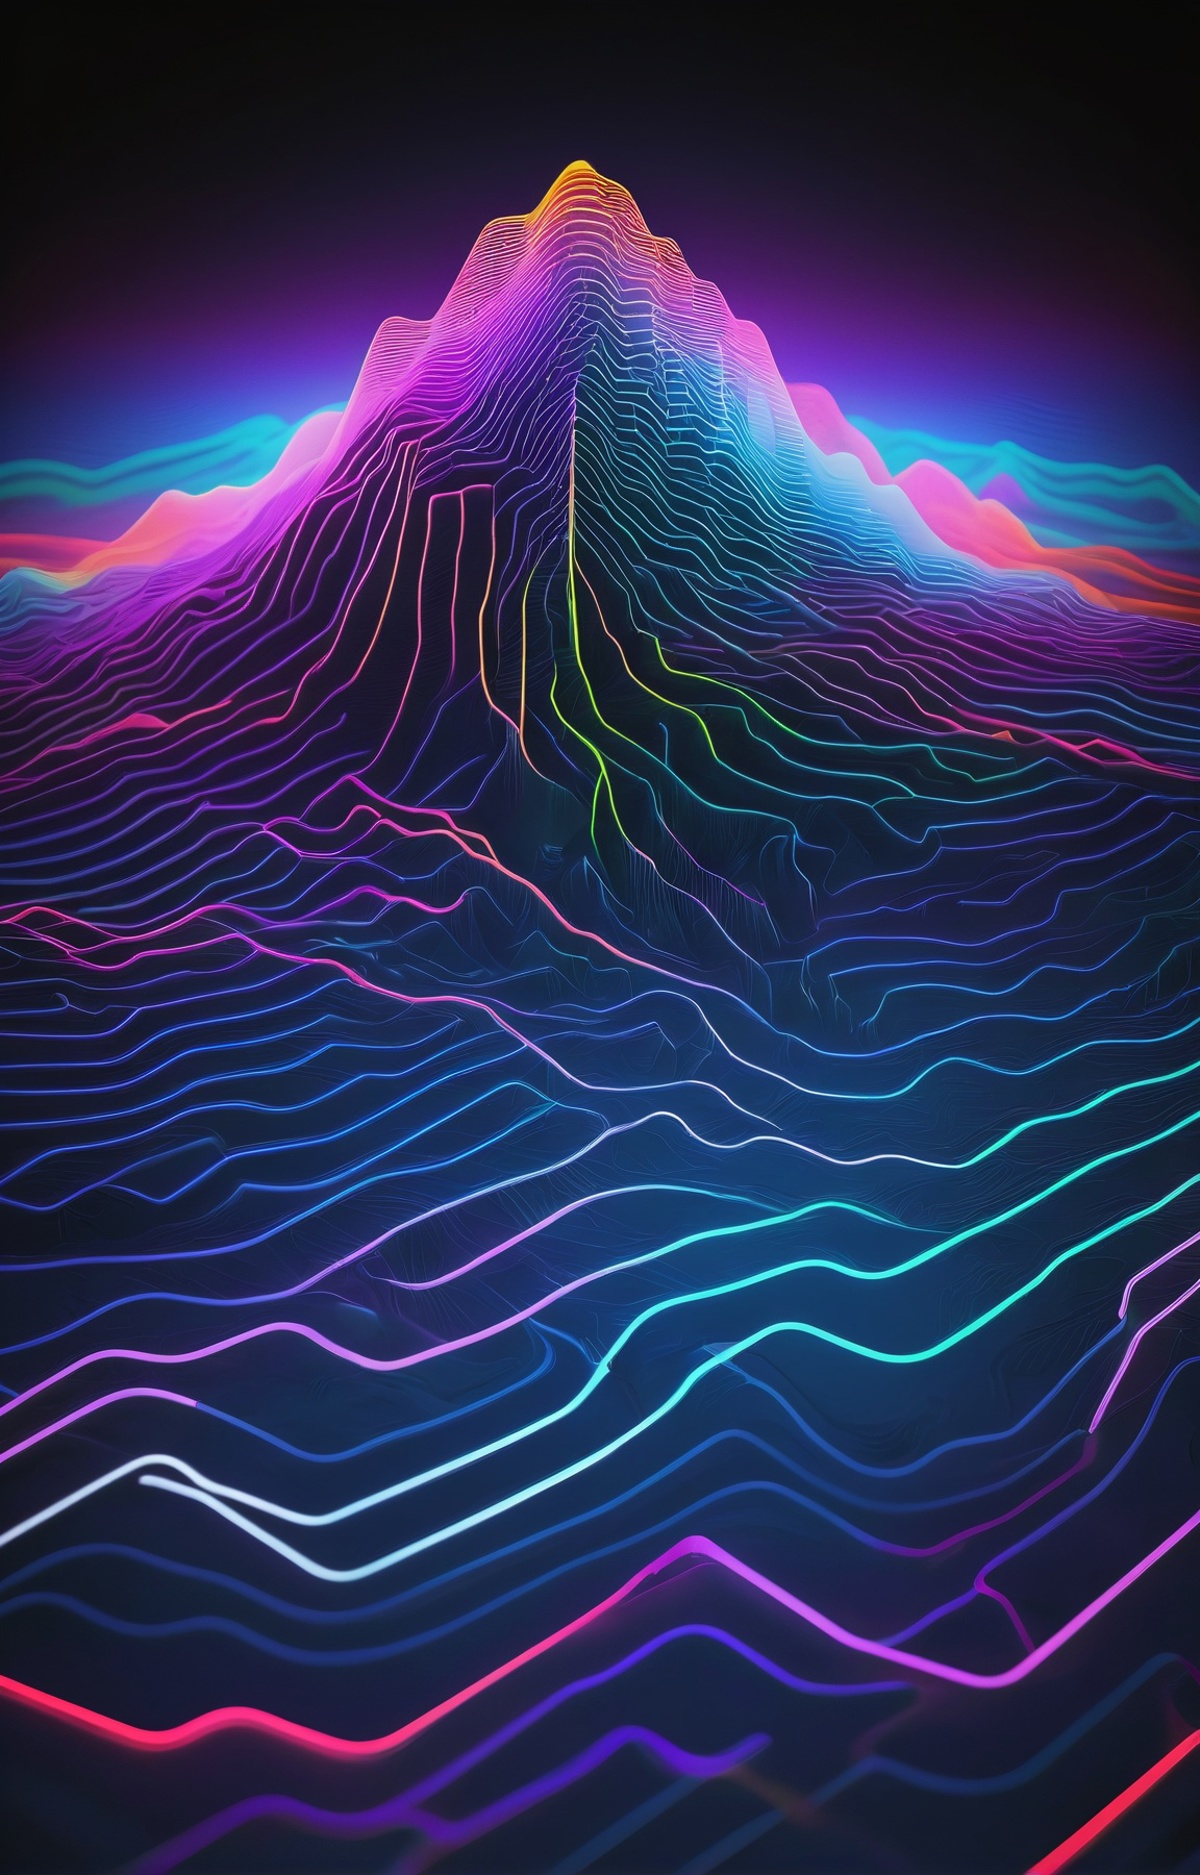 Colorful mountain with purple and blue hues and bright stripes.